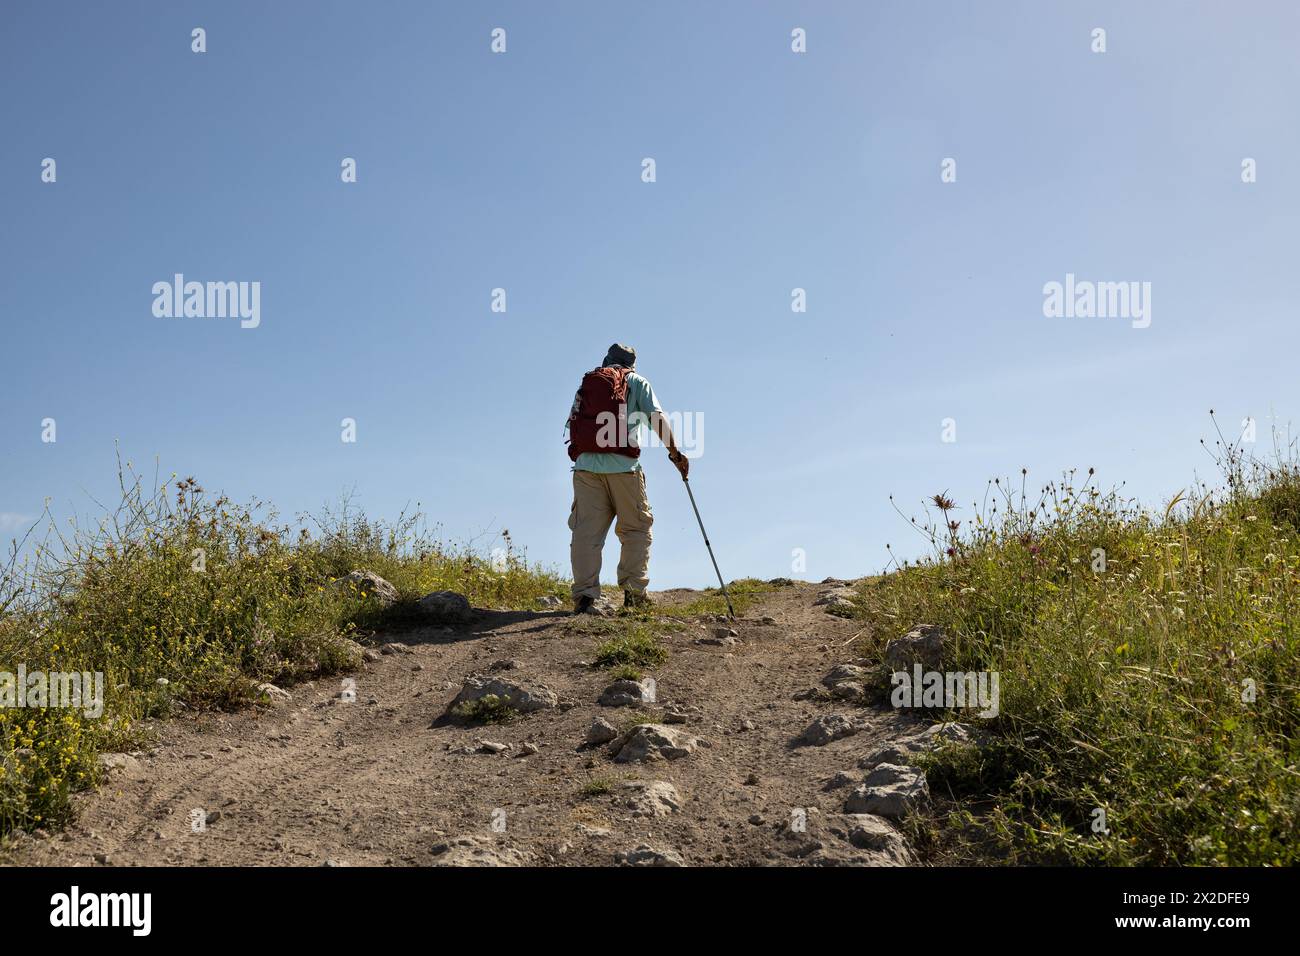 male backpacker with a hiking pole reaches the top of the hill Stock Photo